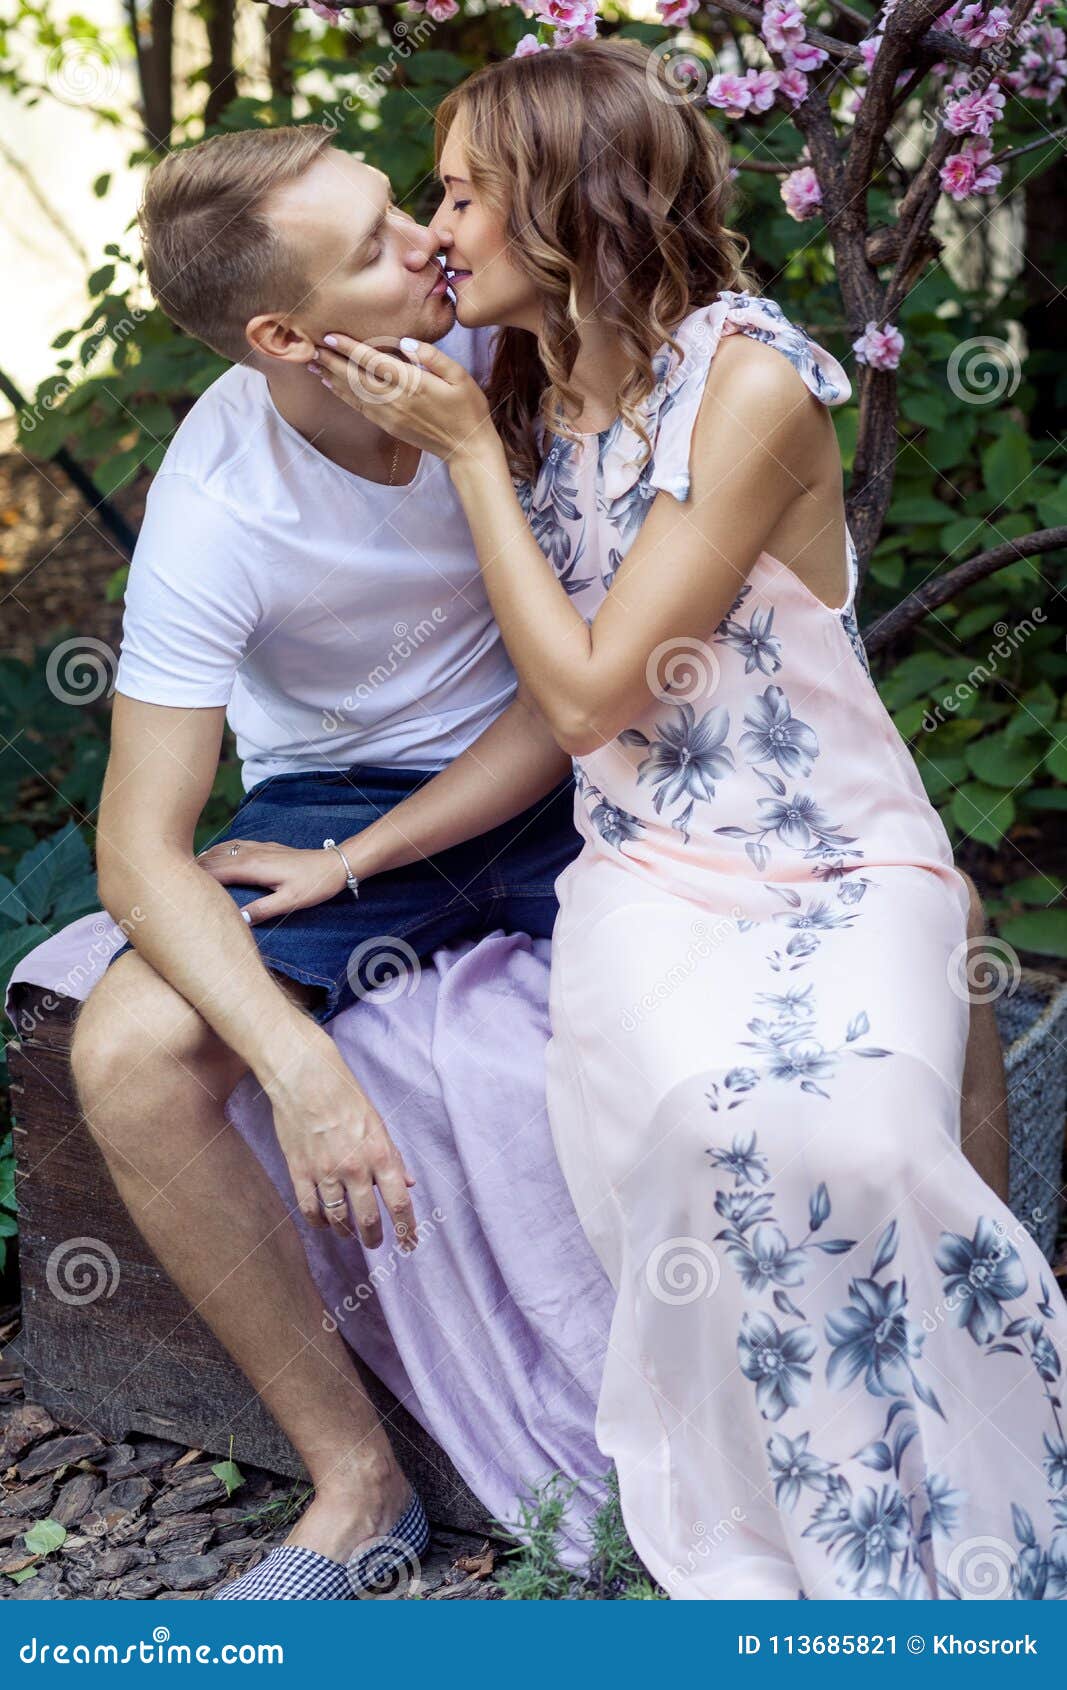 Passionate Kiss Of A Lovely Couple In The Park Stock Image